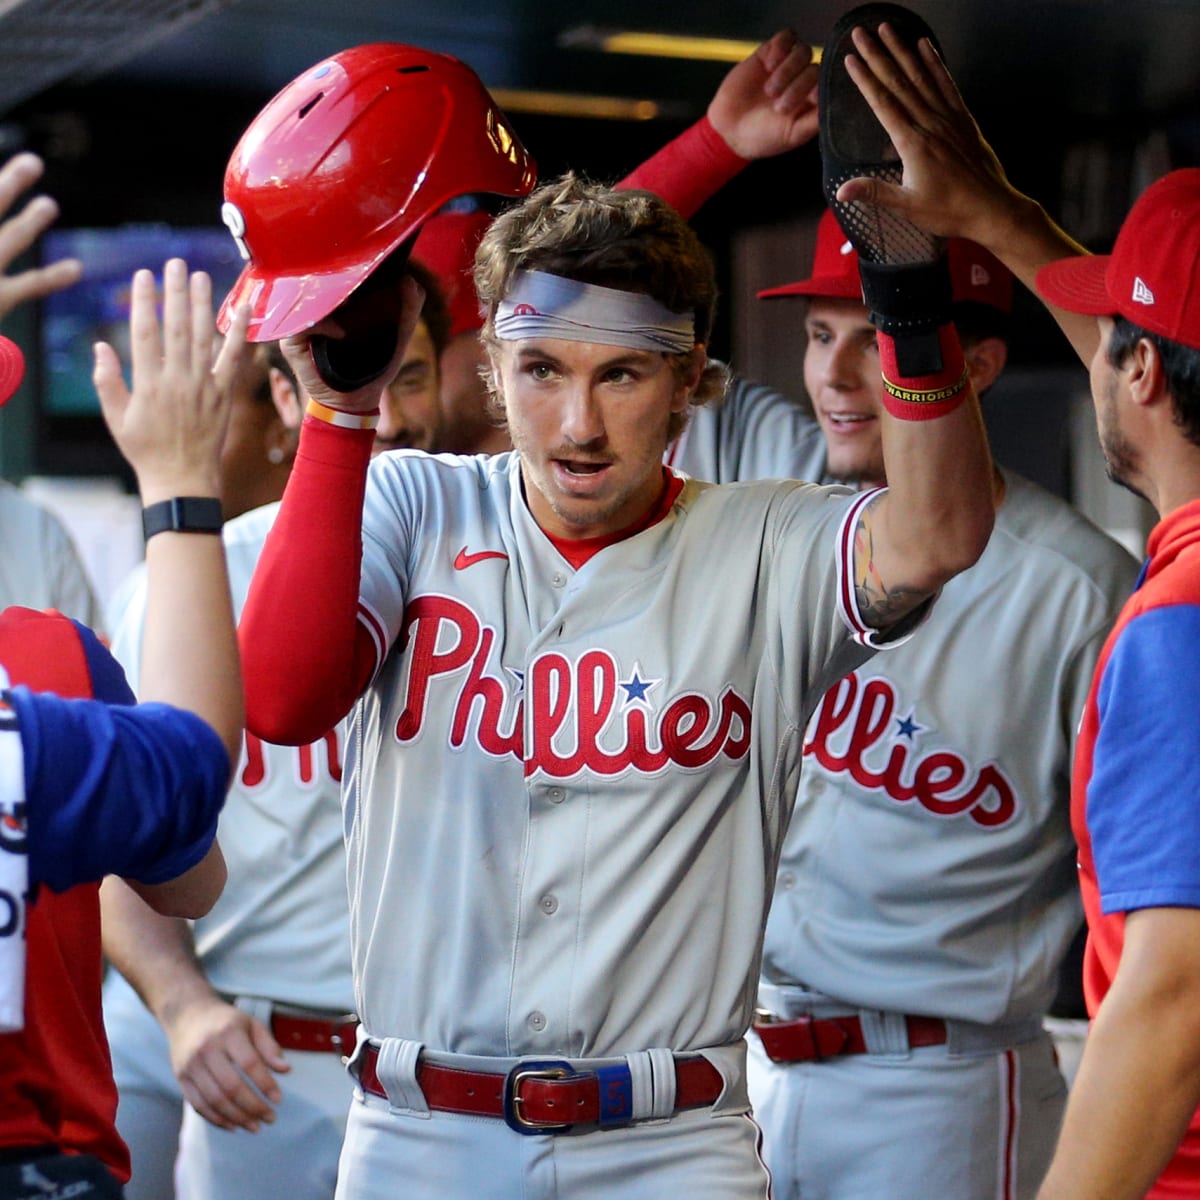 I know I can hit': Phillies top prospect Bryson Stott remains confident  amid rough start